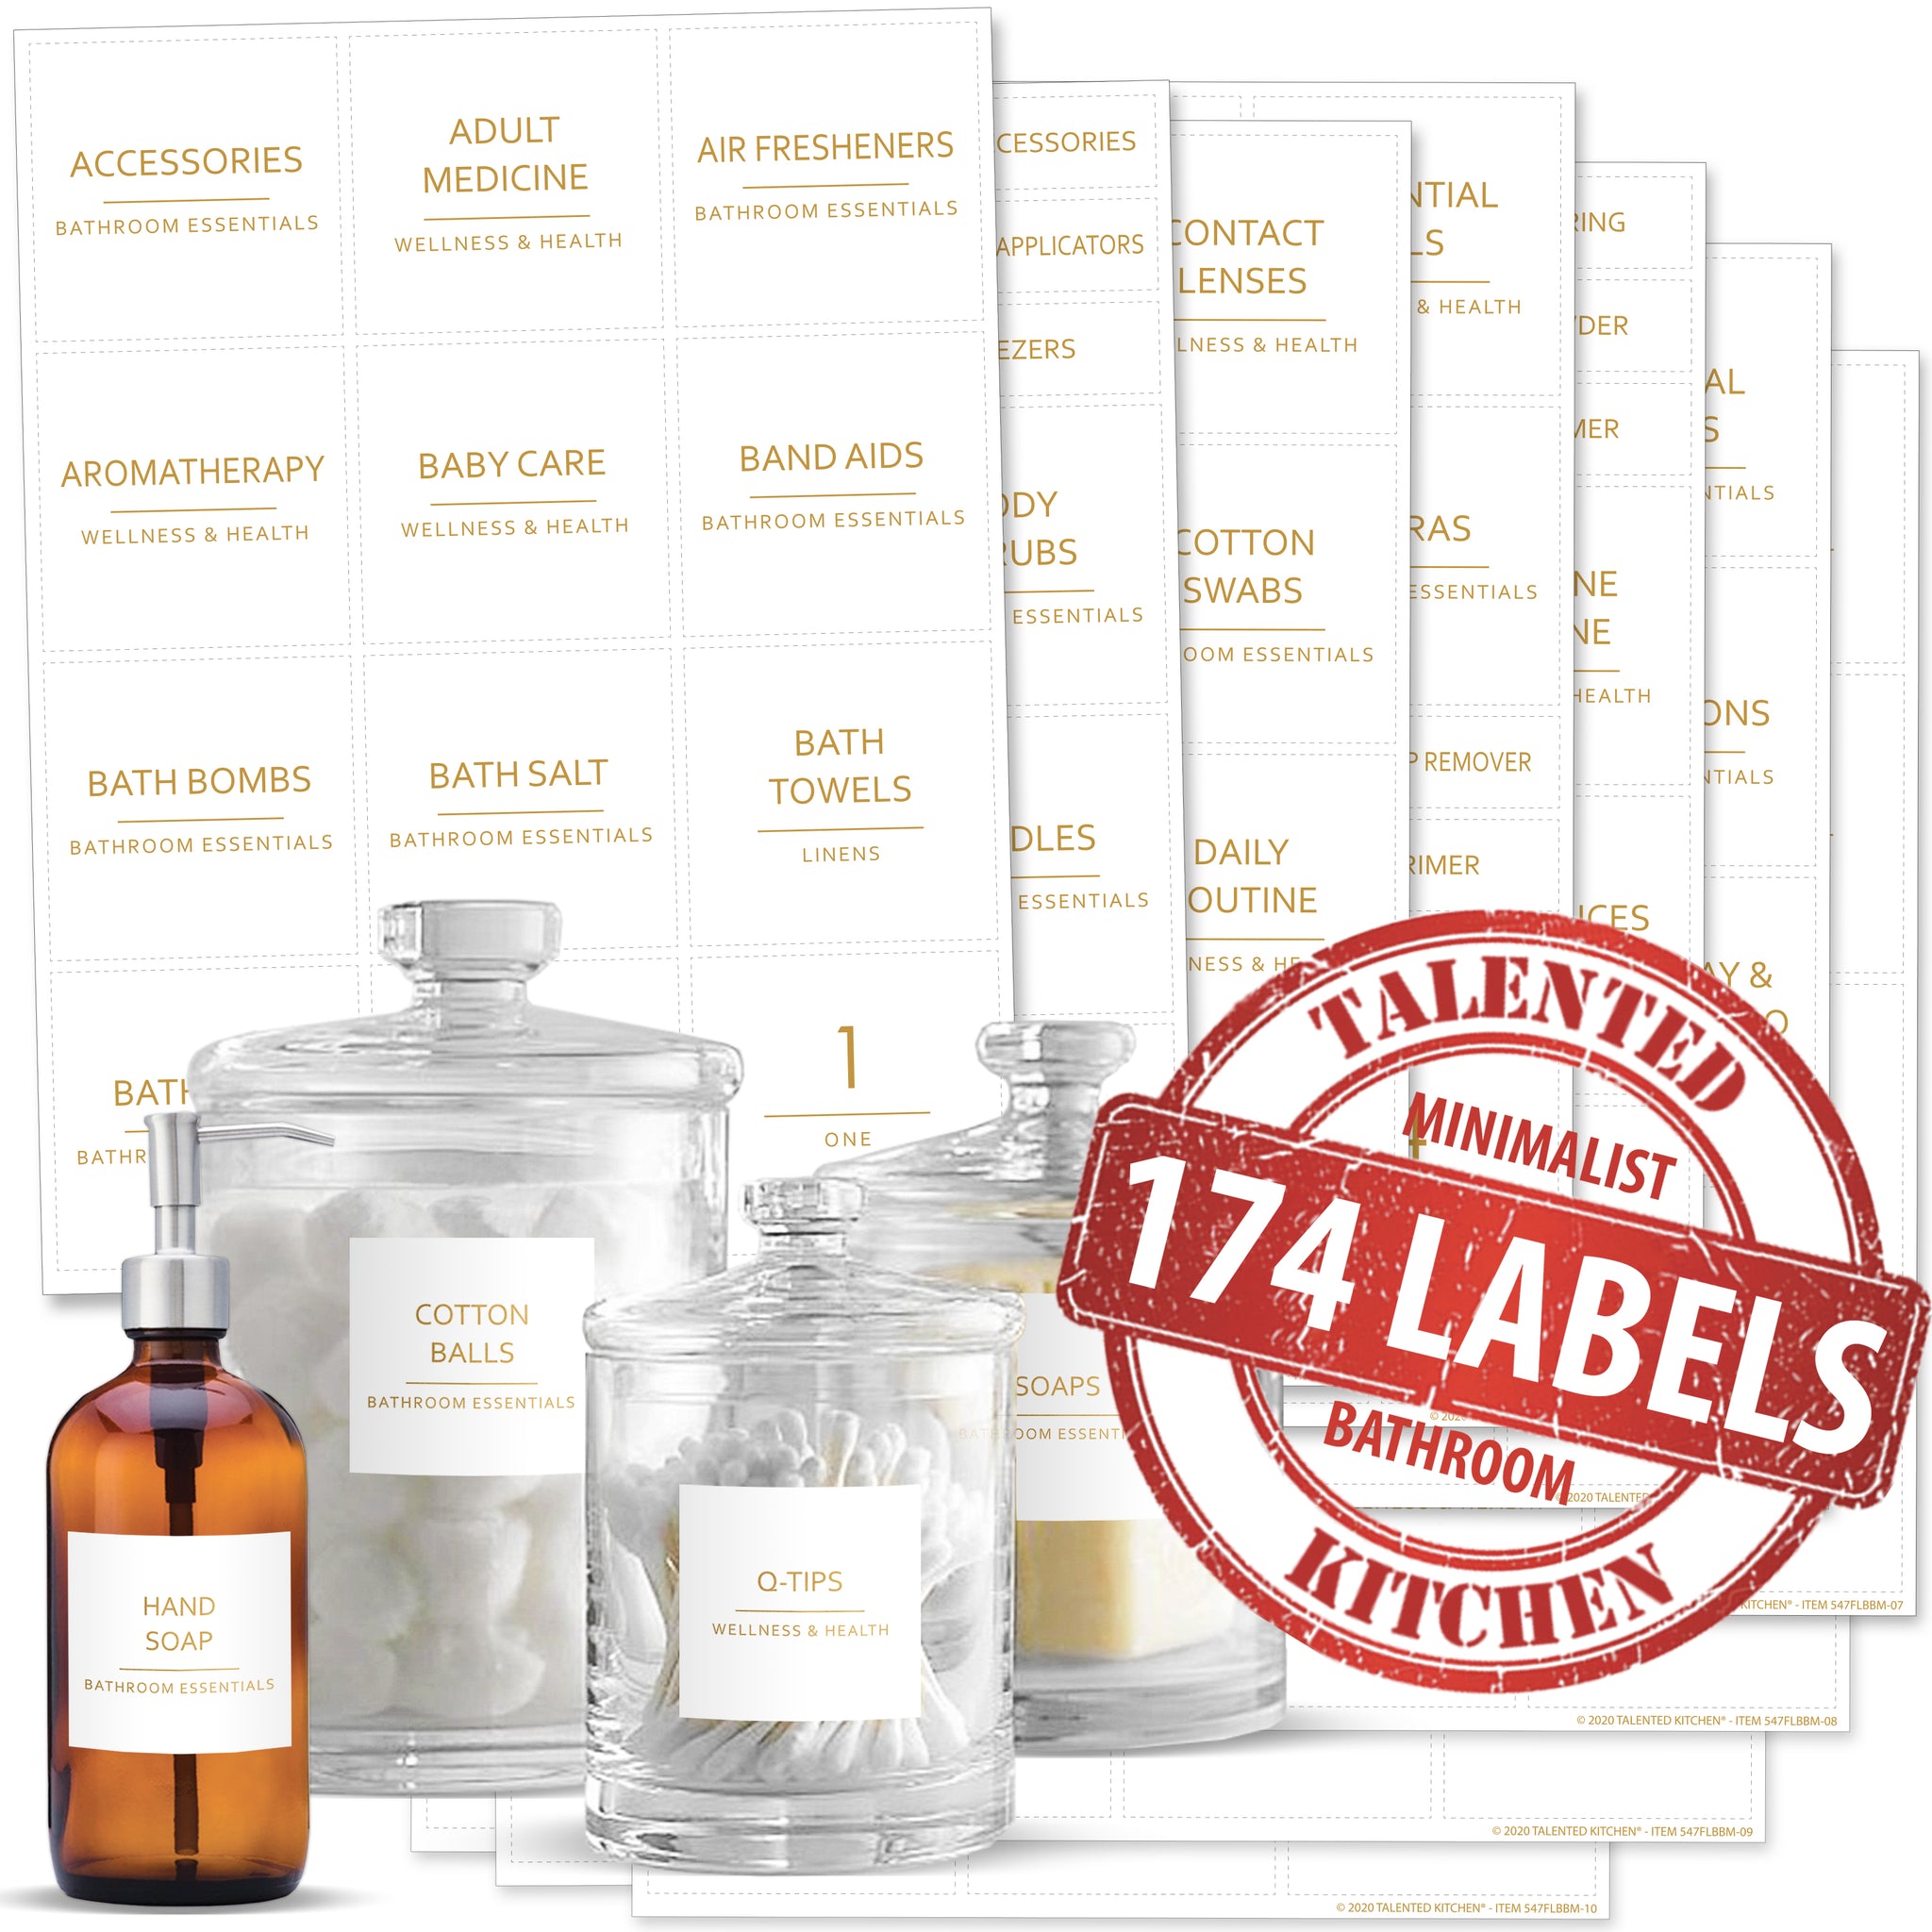 Talented Kitchen 174-Piece Set of Minimalist Bathroom Labels for Organizing  Medicine Cabinets, Black Print on White Stickers for Makeup, Cosmetics,  Shower Bottles (Water-Resistant)